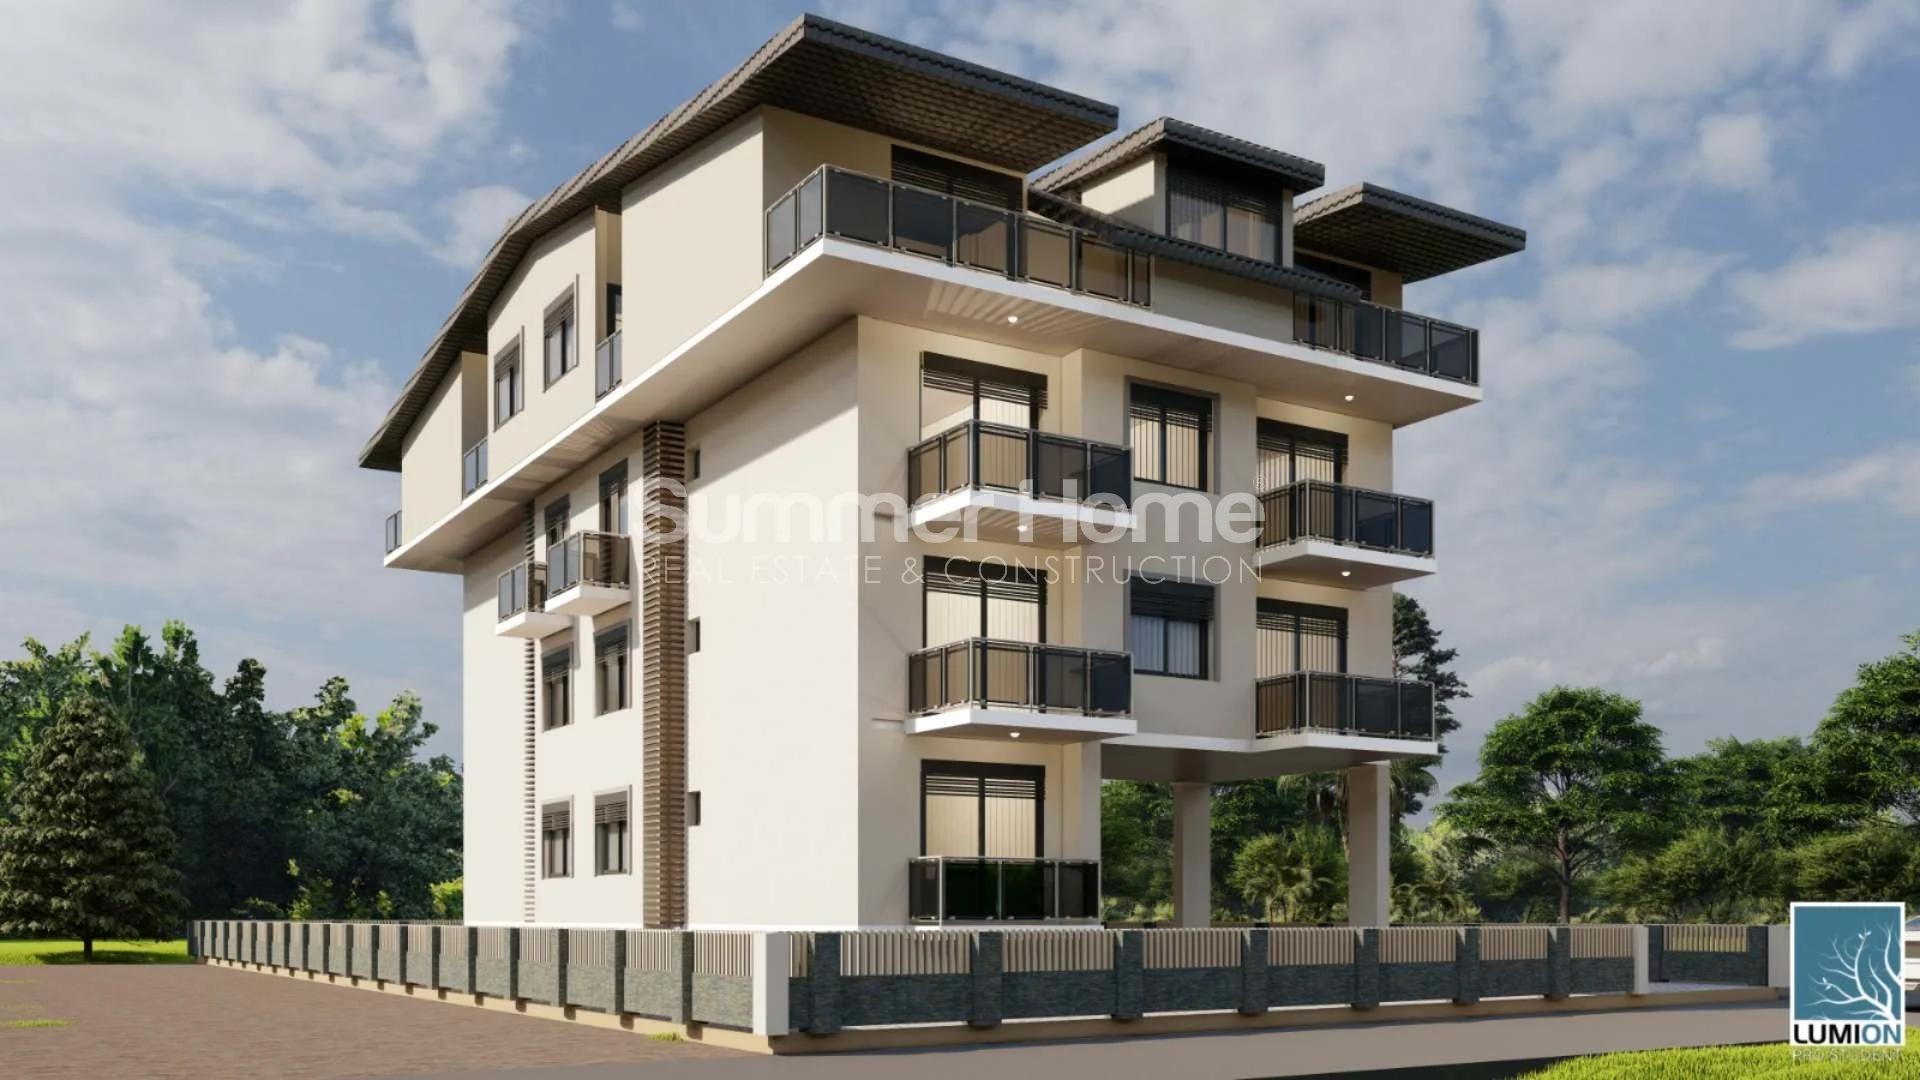 Modern, Chic Apartments For Sale in Gazipasa general - 5